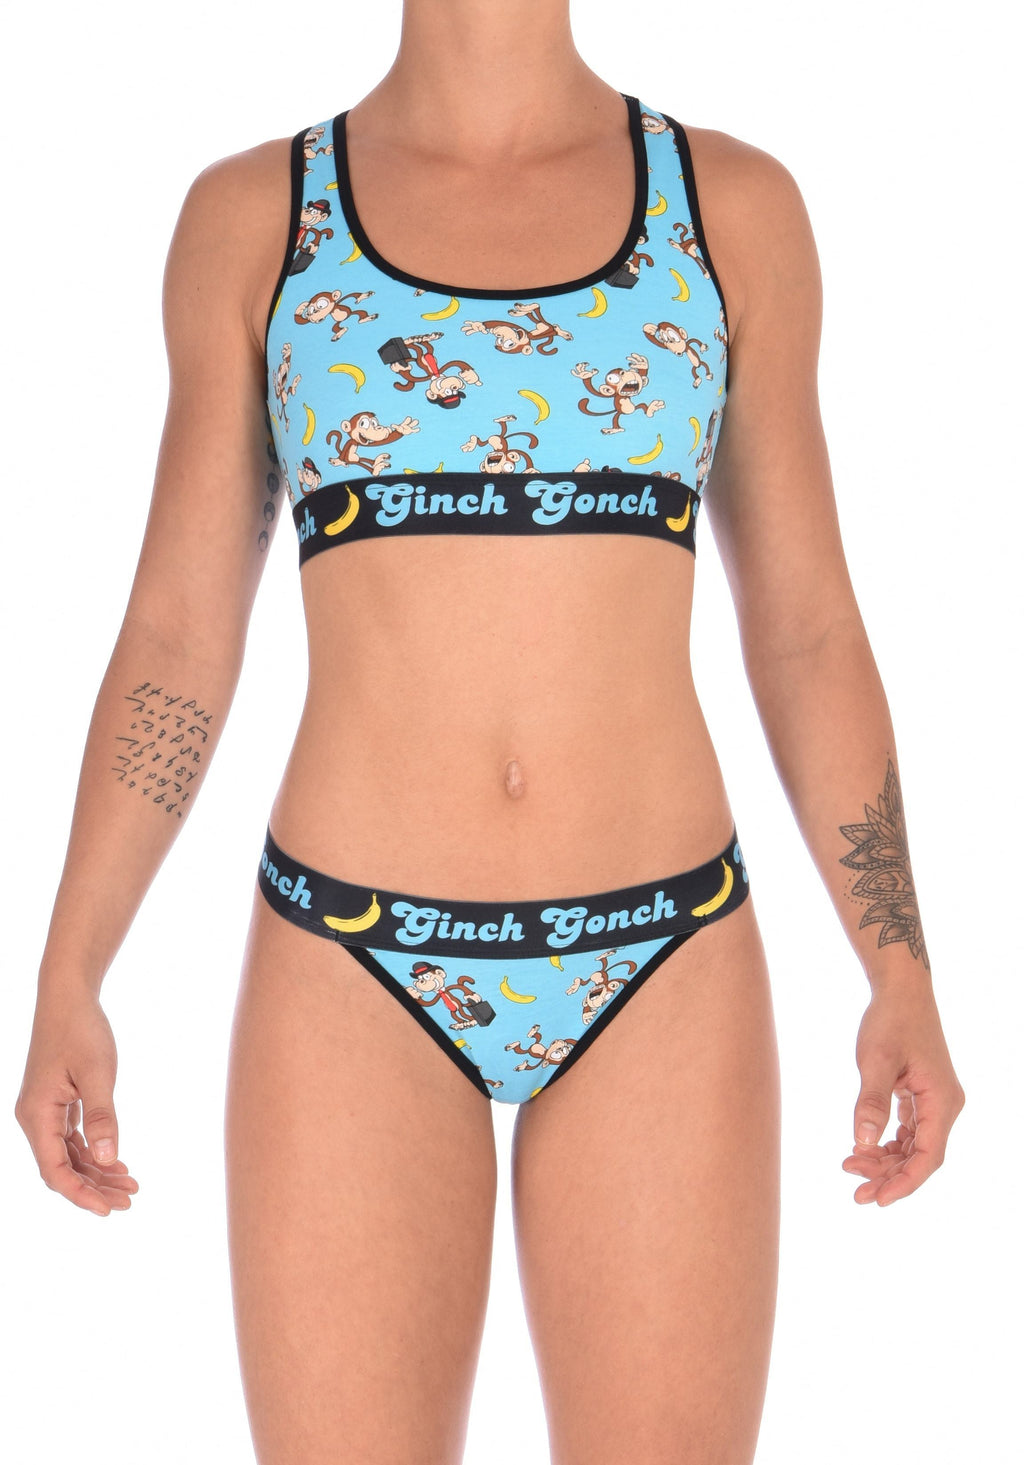 Ginch Gonch Monkey Business Women's Thong Underwear with blue background, monkeys, and bananas. Black trim and printed waistband with Ginch Gonch and bananas. Front. With matching sports bra.